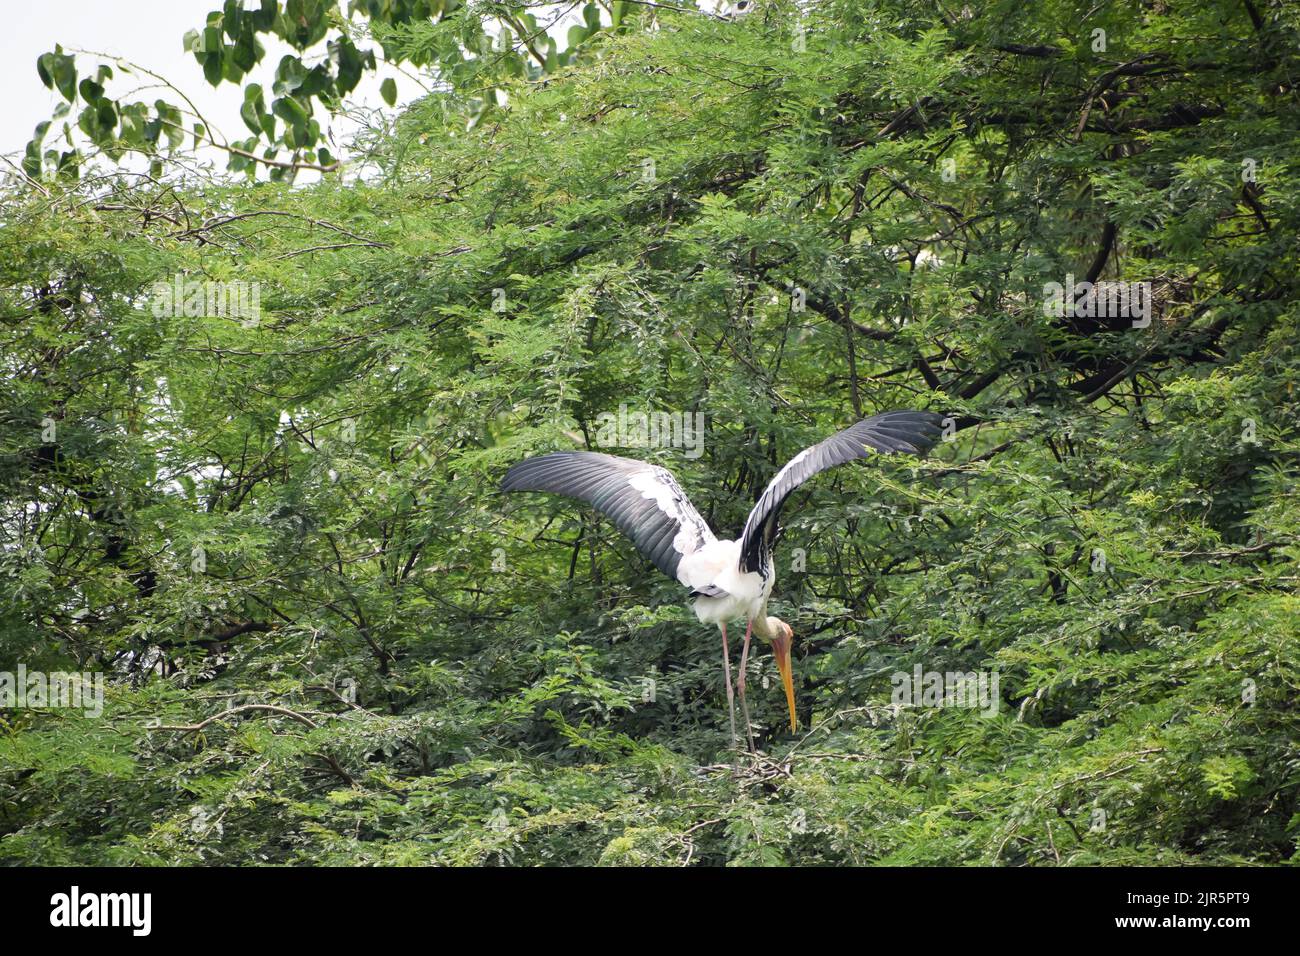 Migratory bird, Painted storks is flying at New Delhi zoo in India Stock Photo